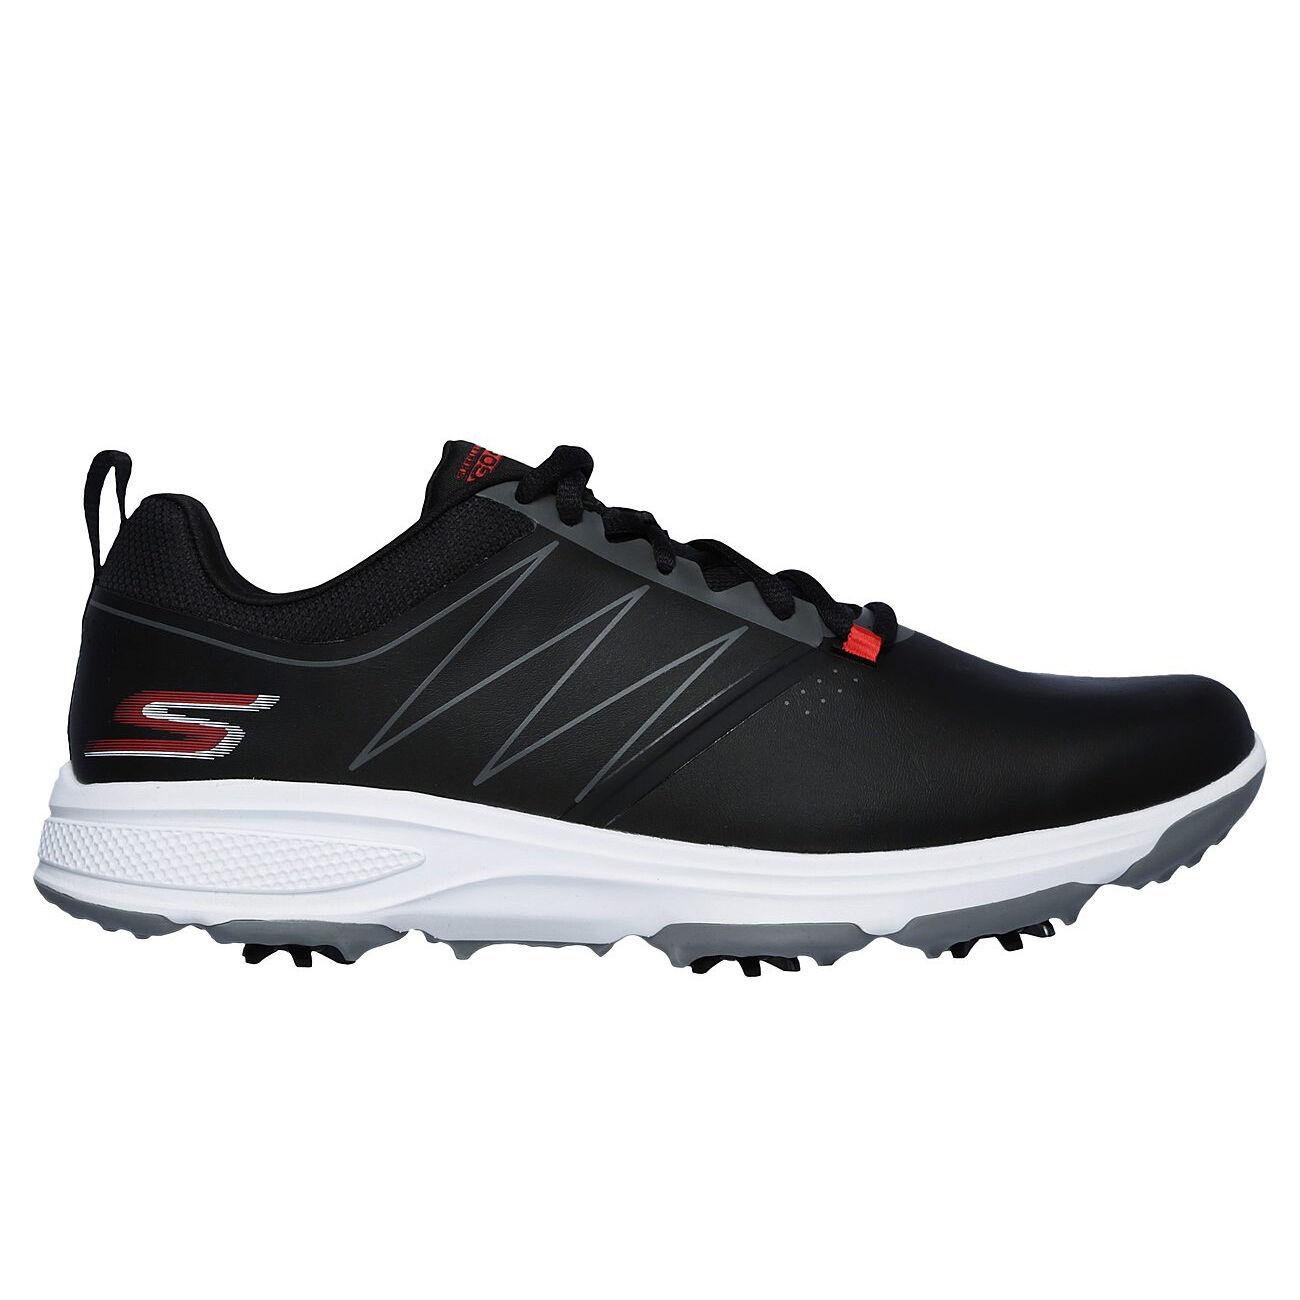 sketchers wide golf shoes Sale,up to 61 